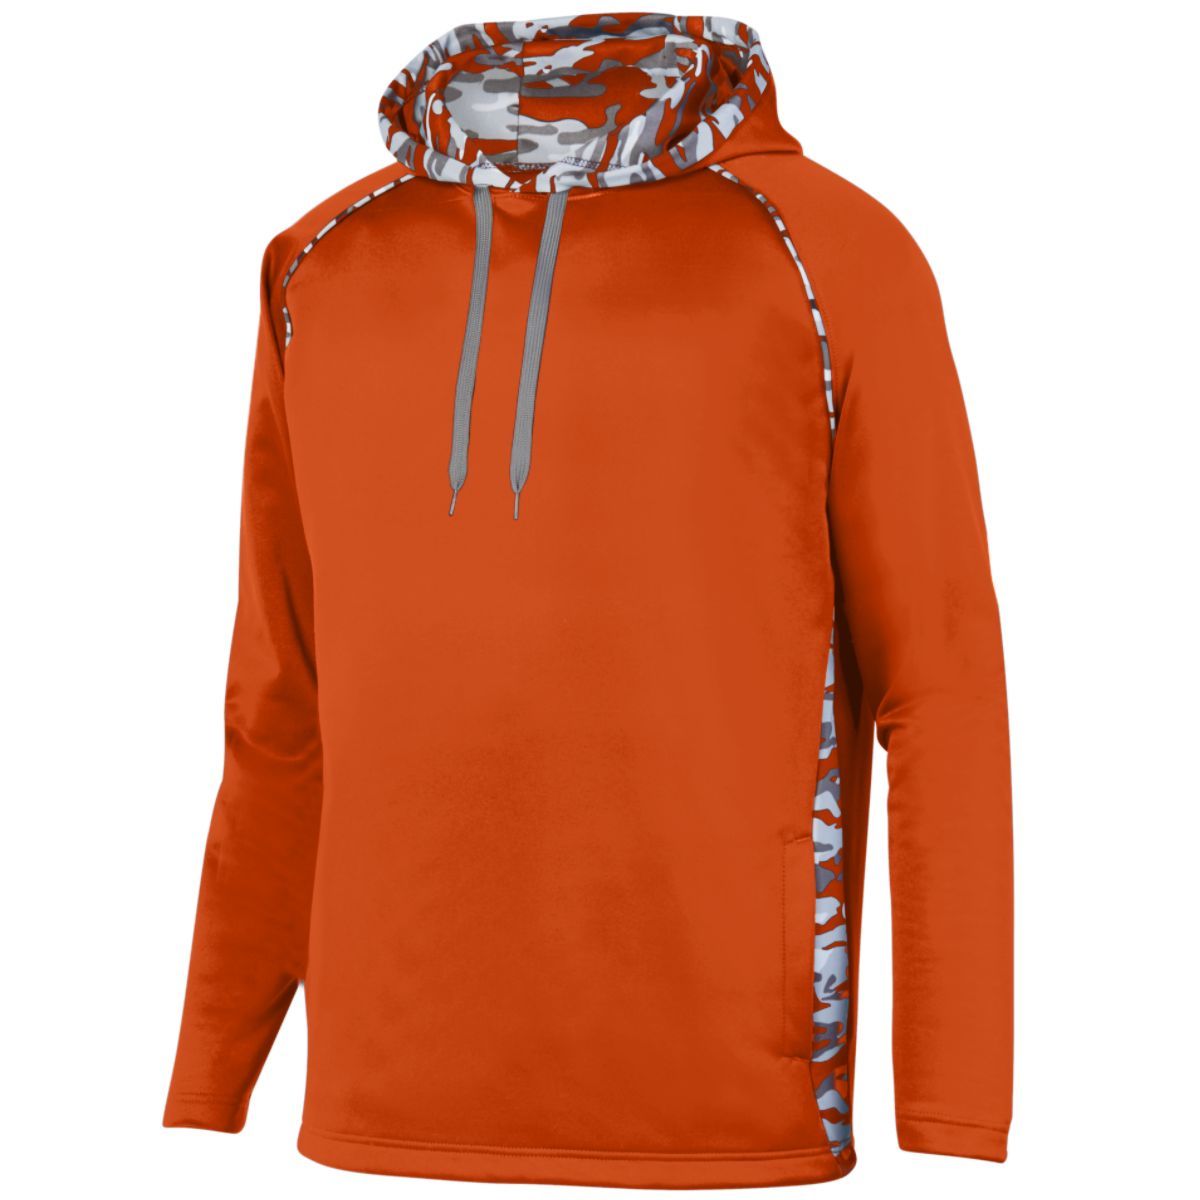 Augusta Sportswear Mod Camo Hoodie in Orange/Orange Mod  -Part of the Adult, Adult-Hoodie, Hoodies, Augusta-Products product lines at KanaleyCreations.com